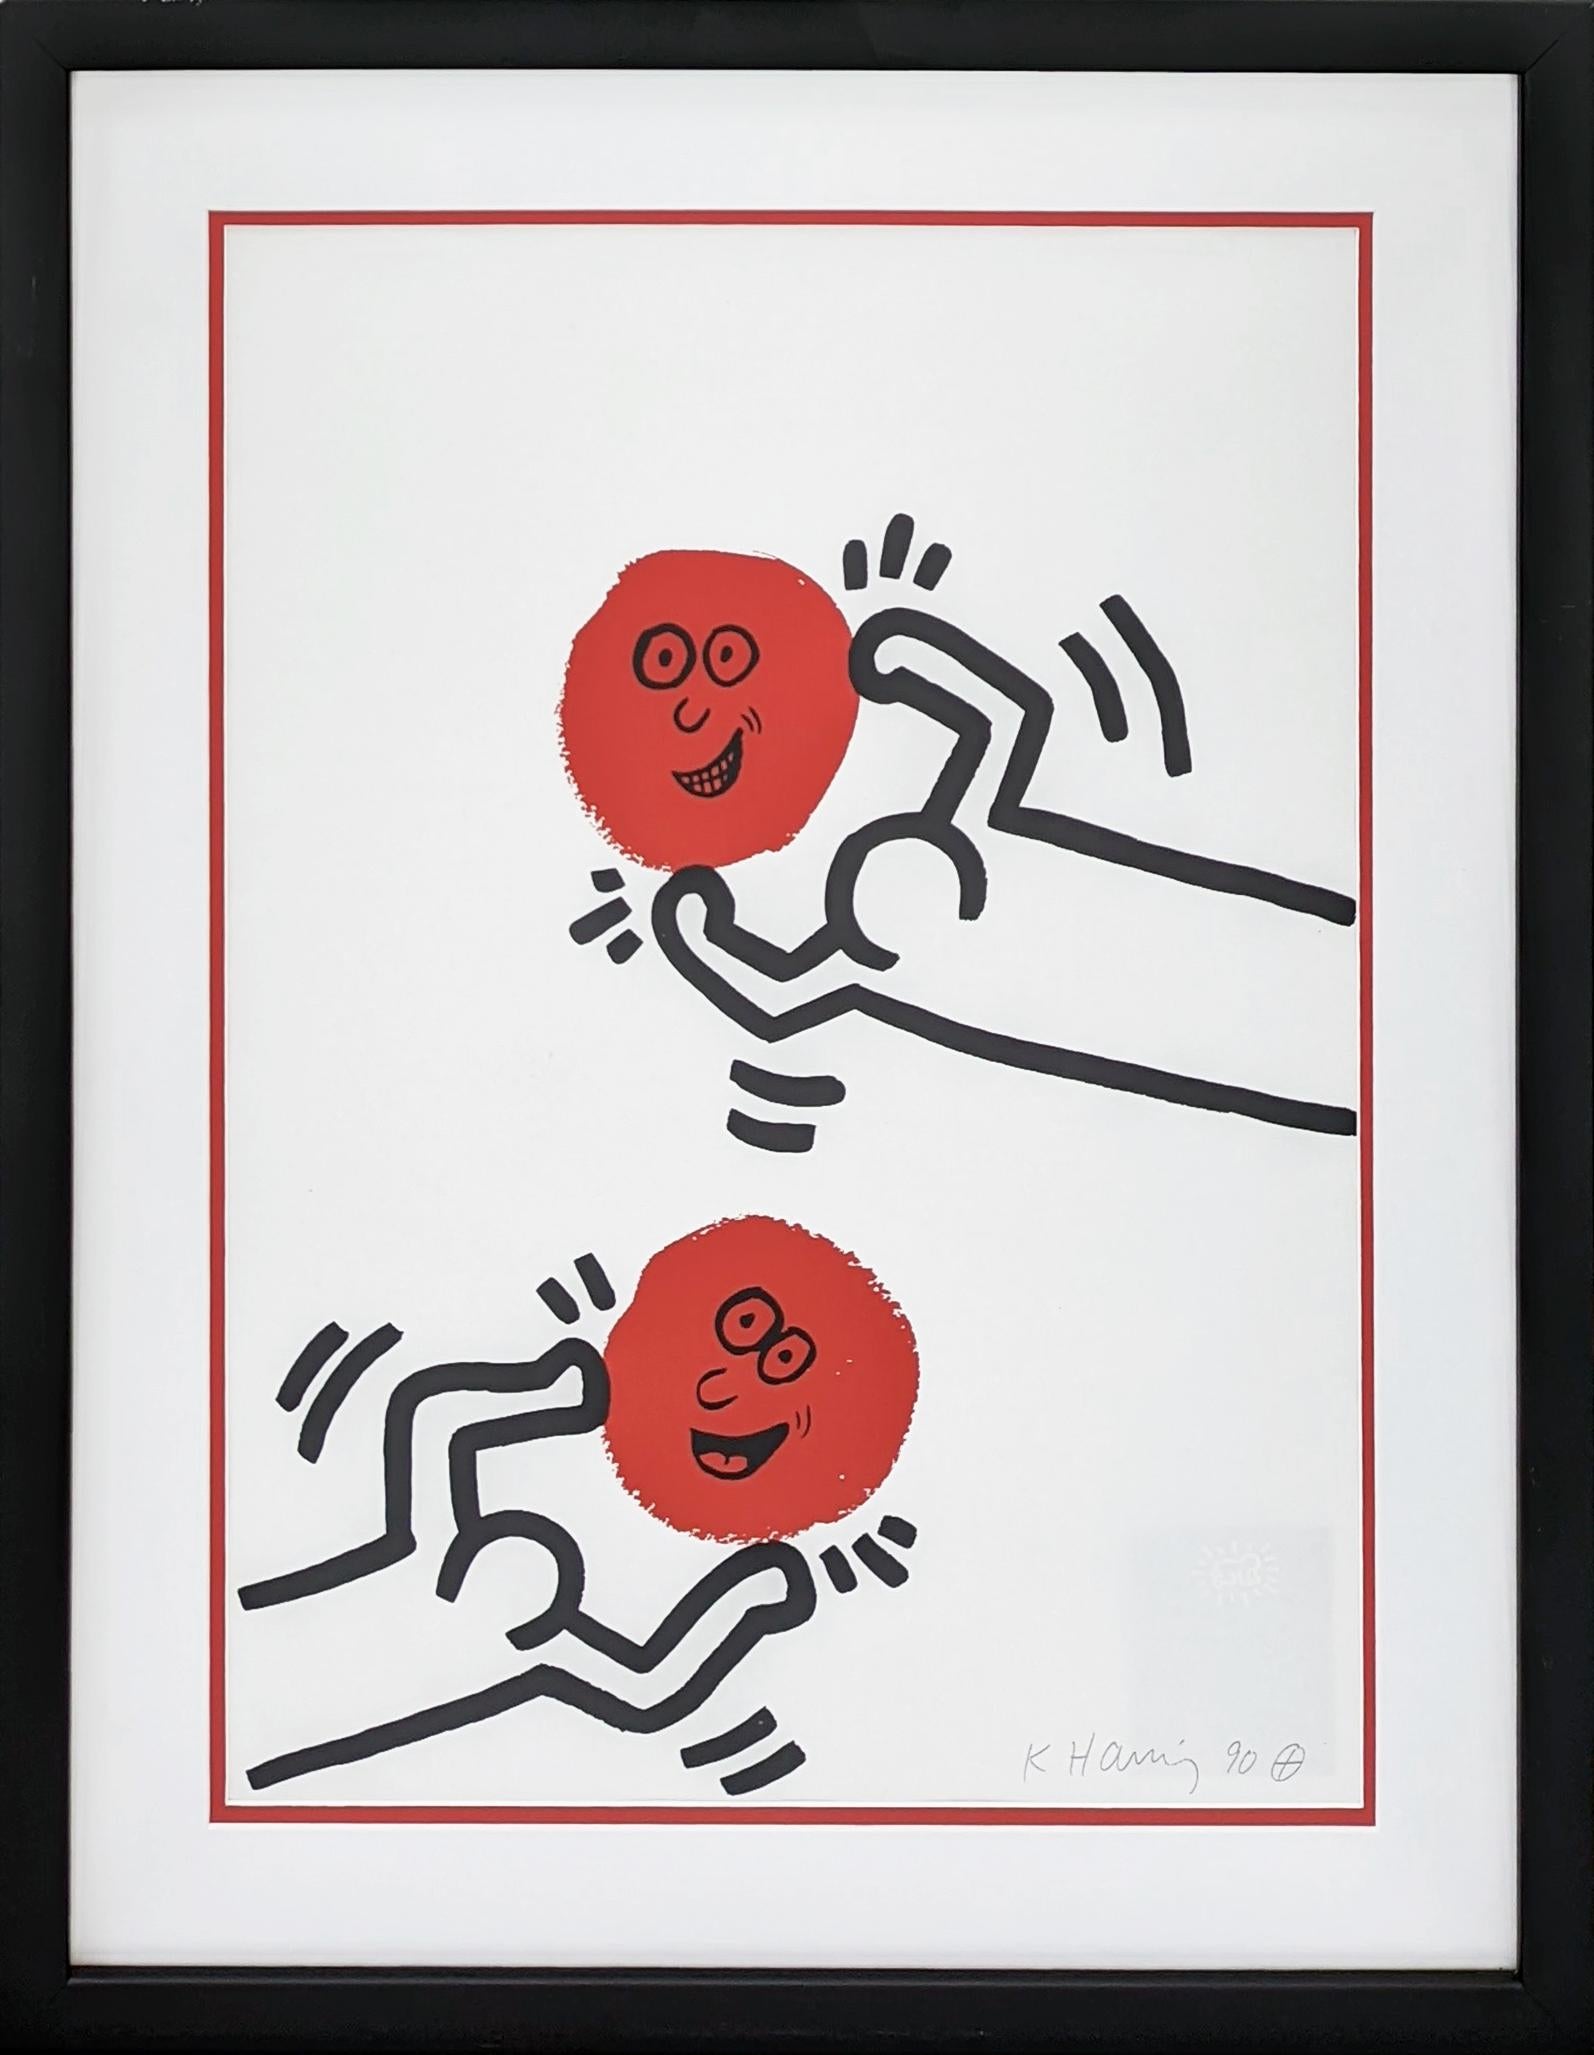 Keith Haring Portrait Print - "PLATE XI" FROM THE STORY OF RED AND BLUE